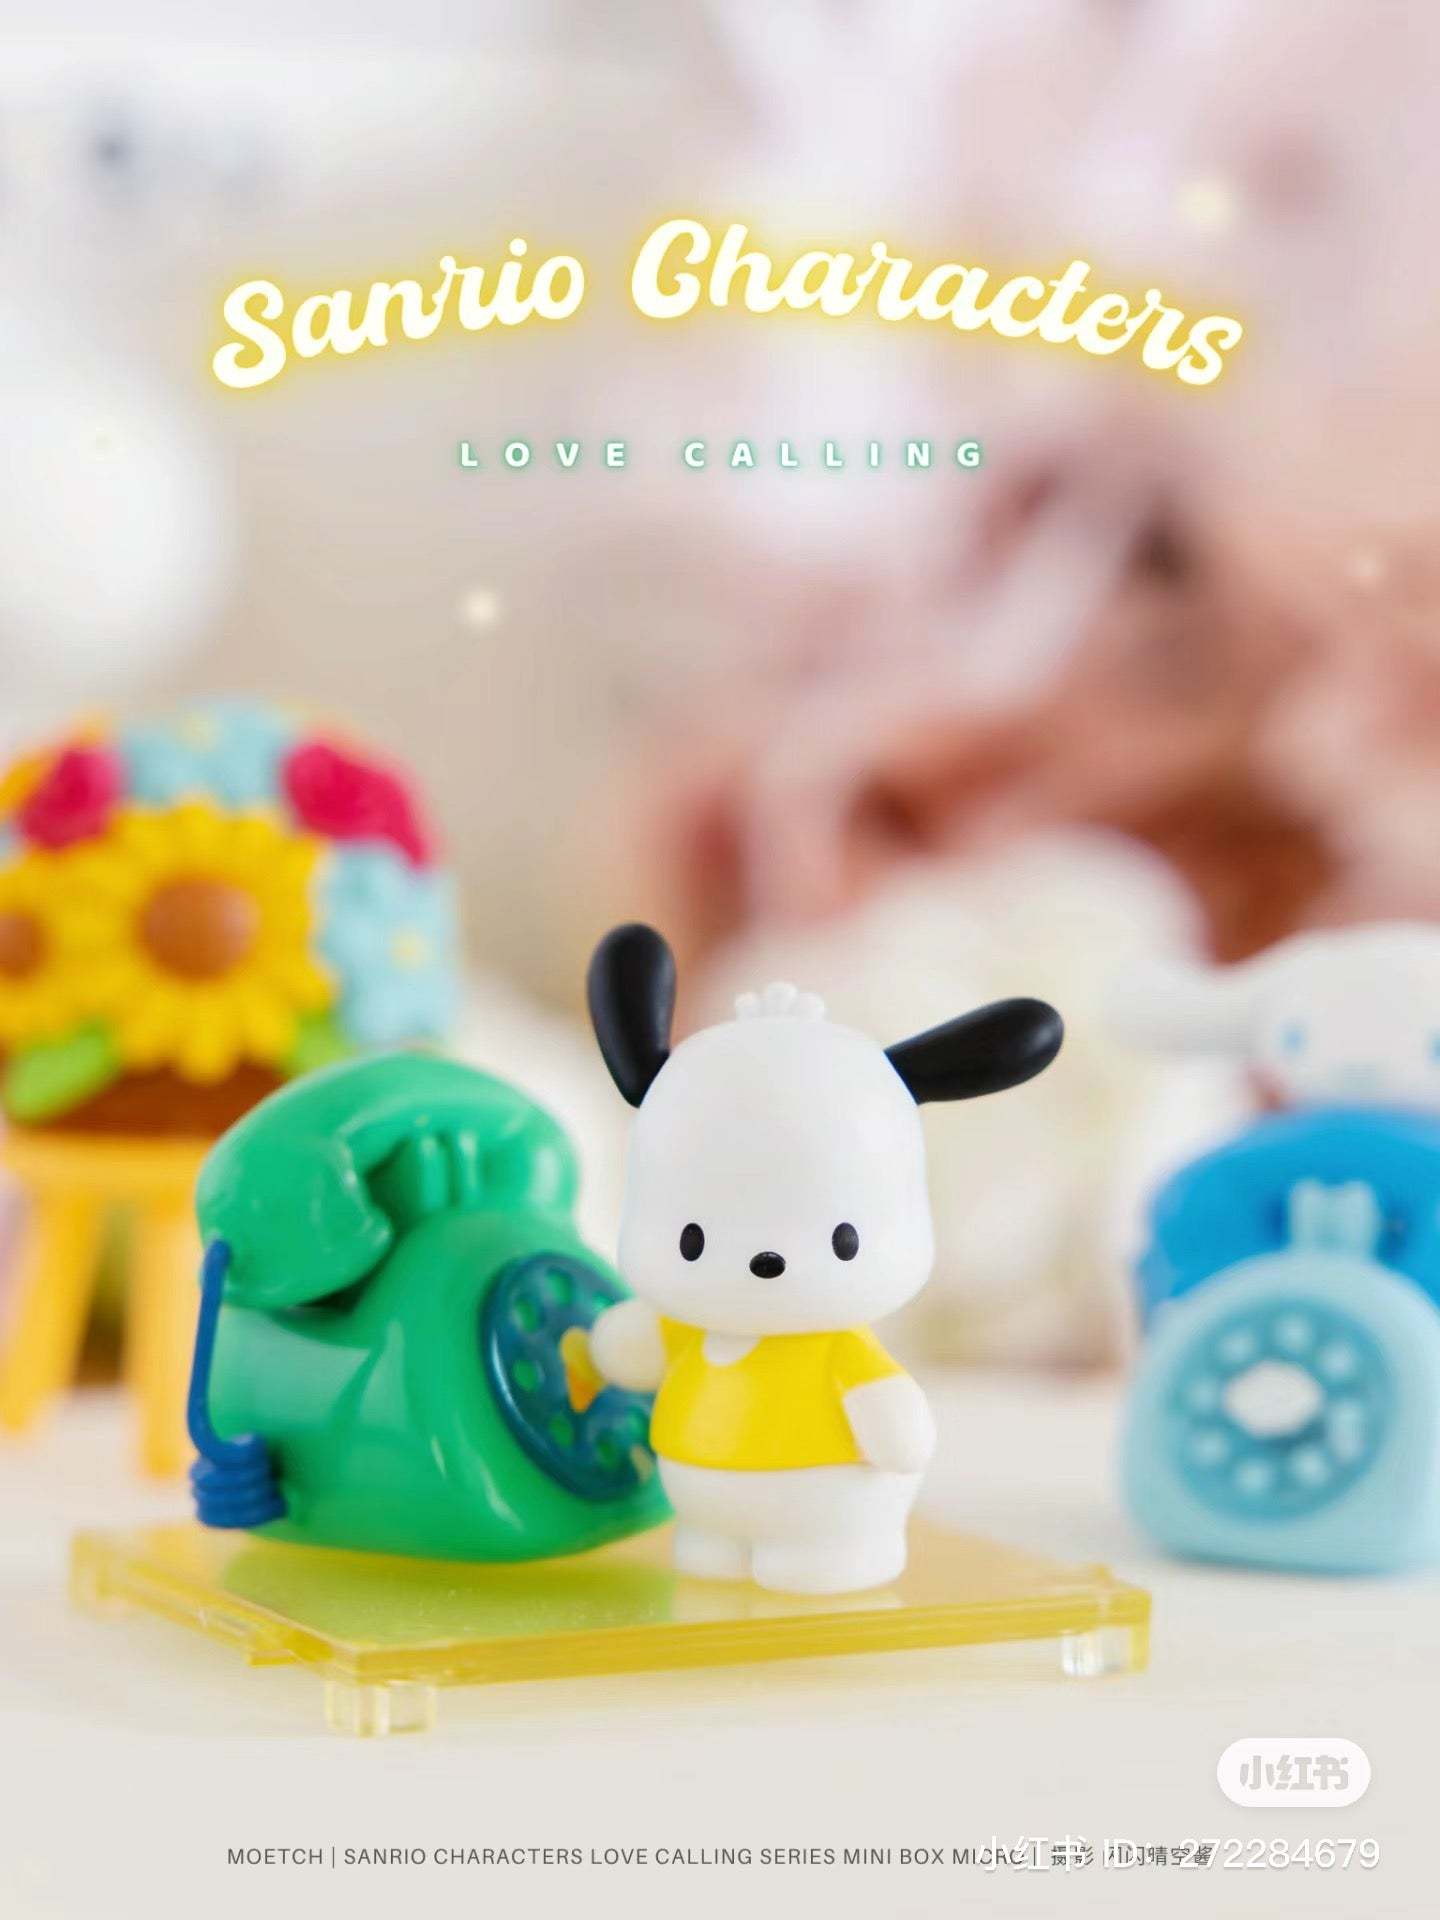 Sanrio characters Love Calling Series Mini Box Micro Blind Box featuring various toy designs, including a toy dog and a green turtle, displayed on a table.